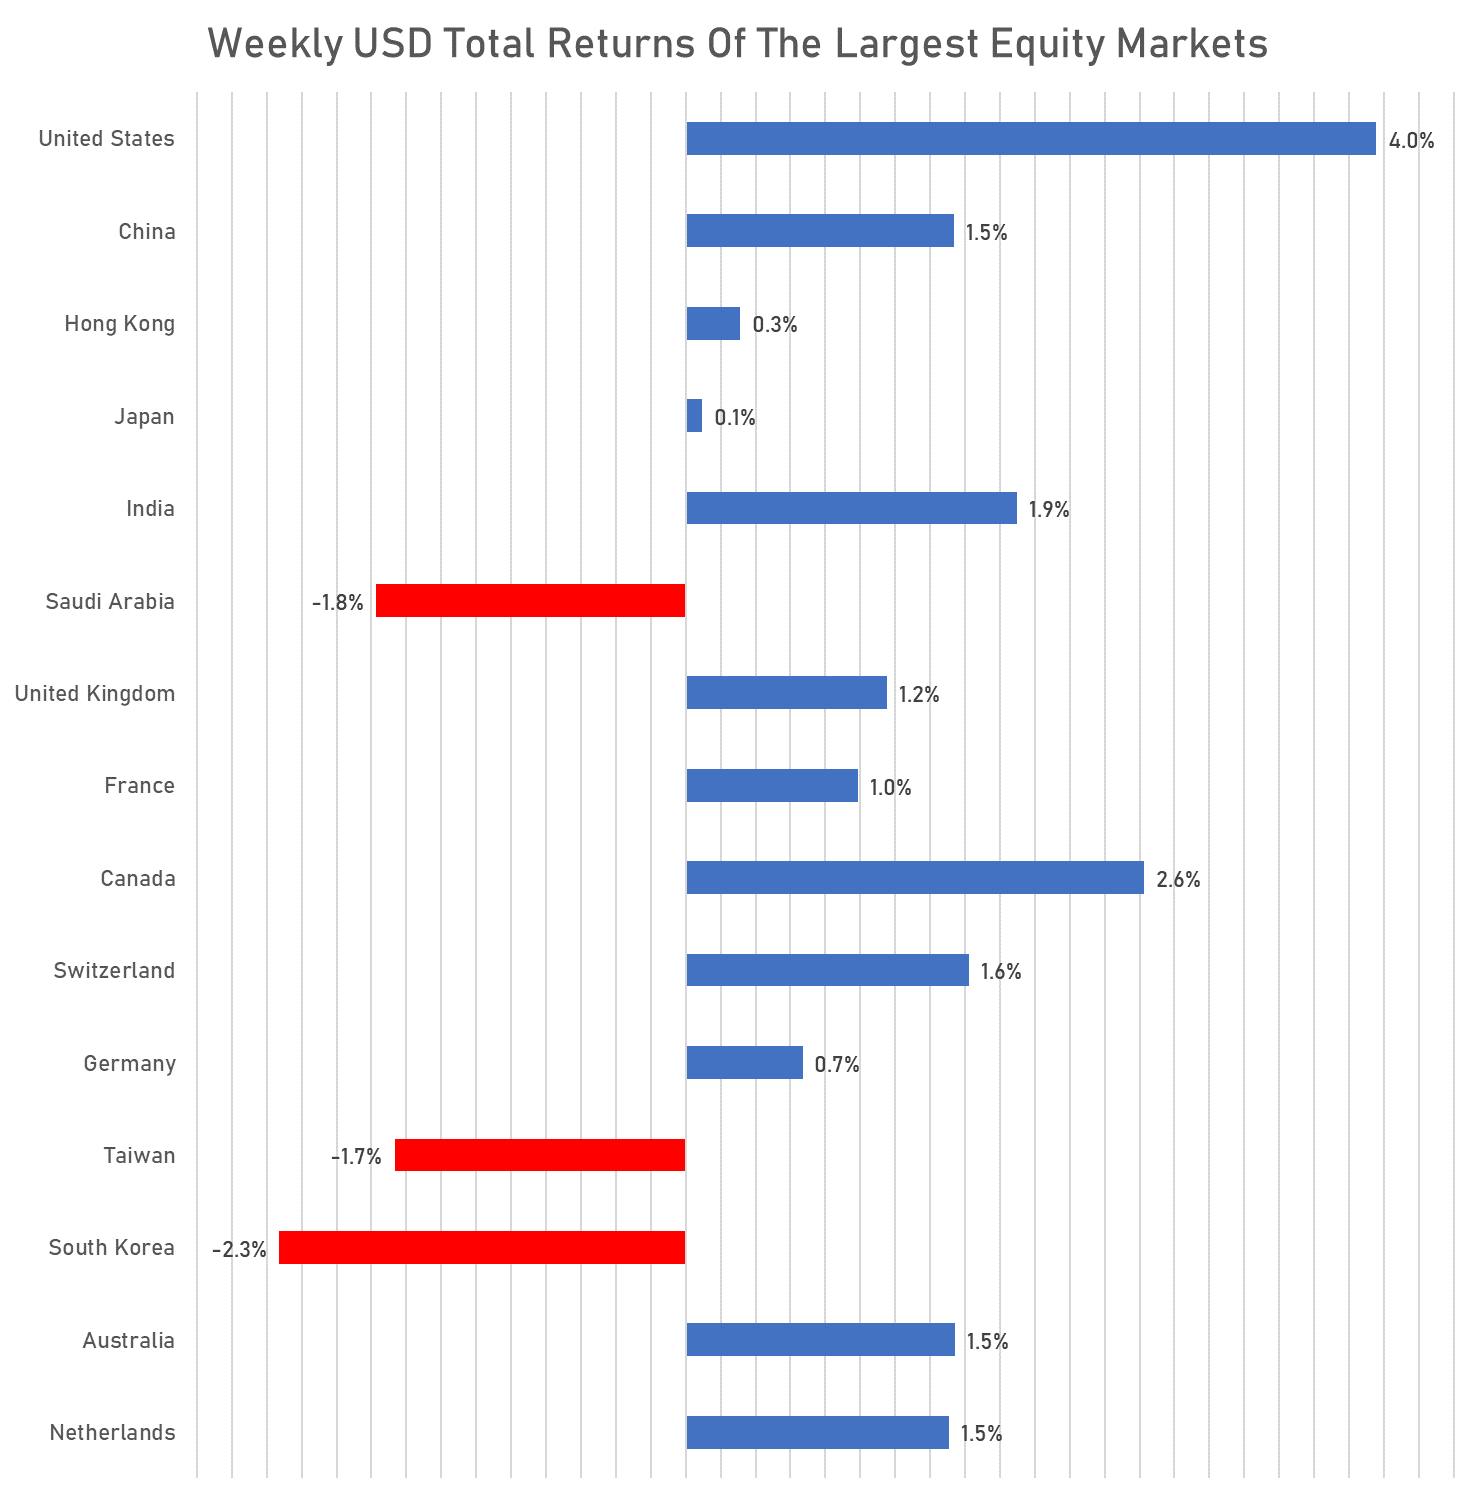 Weekly USD Total Returns Of major equity markets | Sources: phipost.com, FactSet data